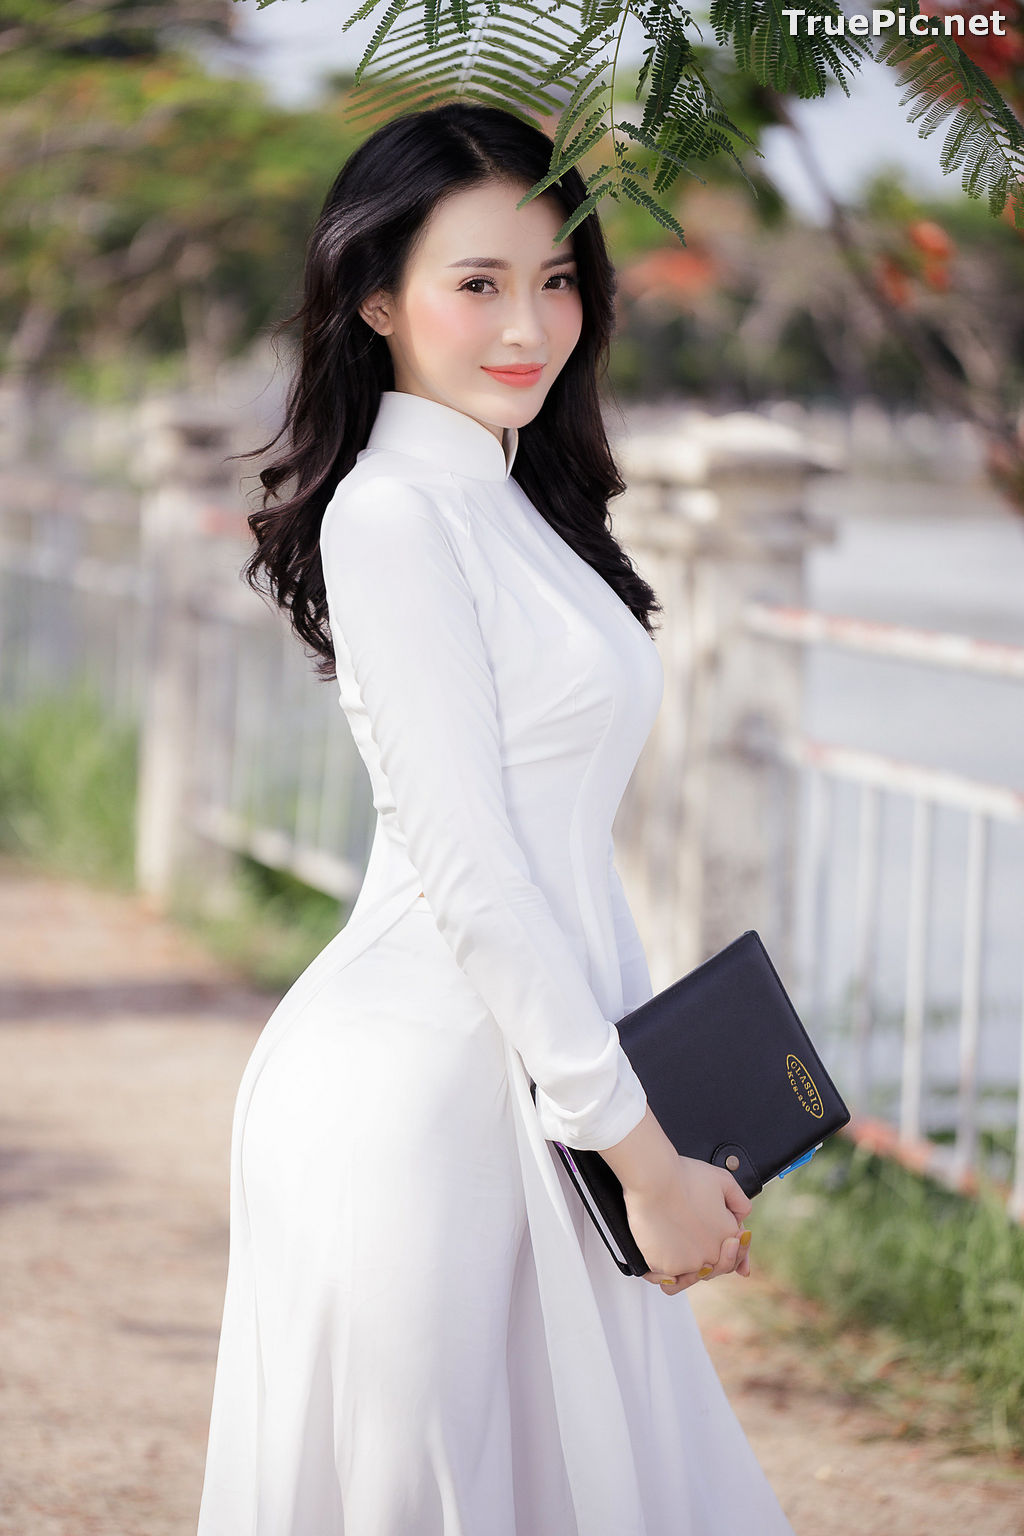 Image The Beauty of Vietnamese Girls with Traditional Dress (Ao Dai) #3 - TruePic.net - Picture-35